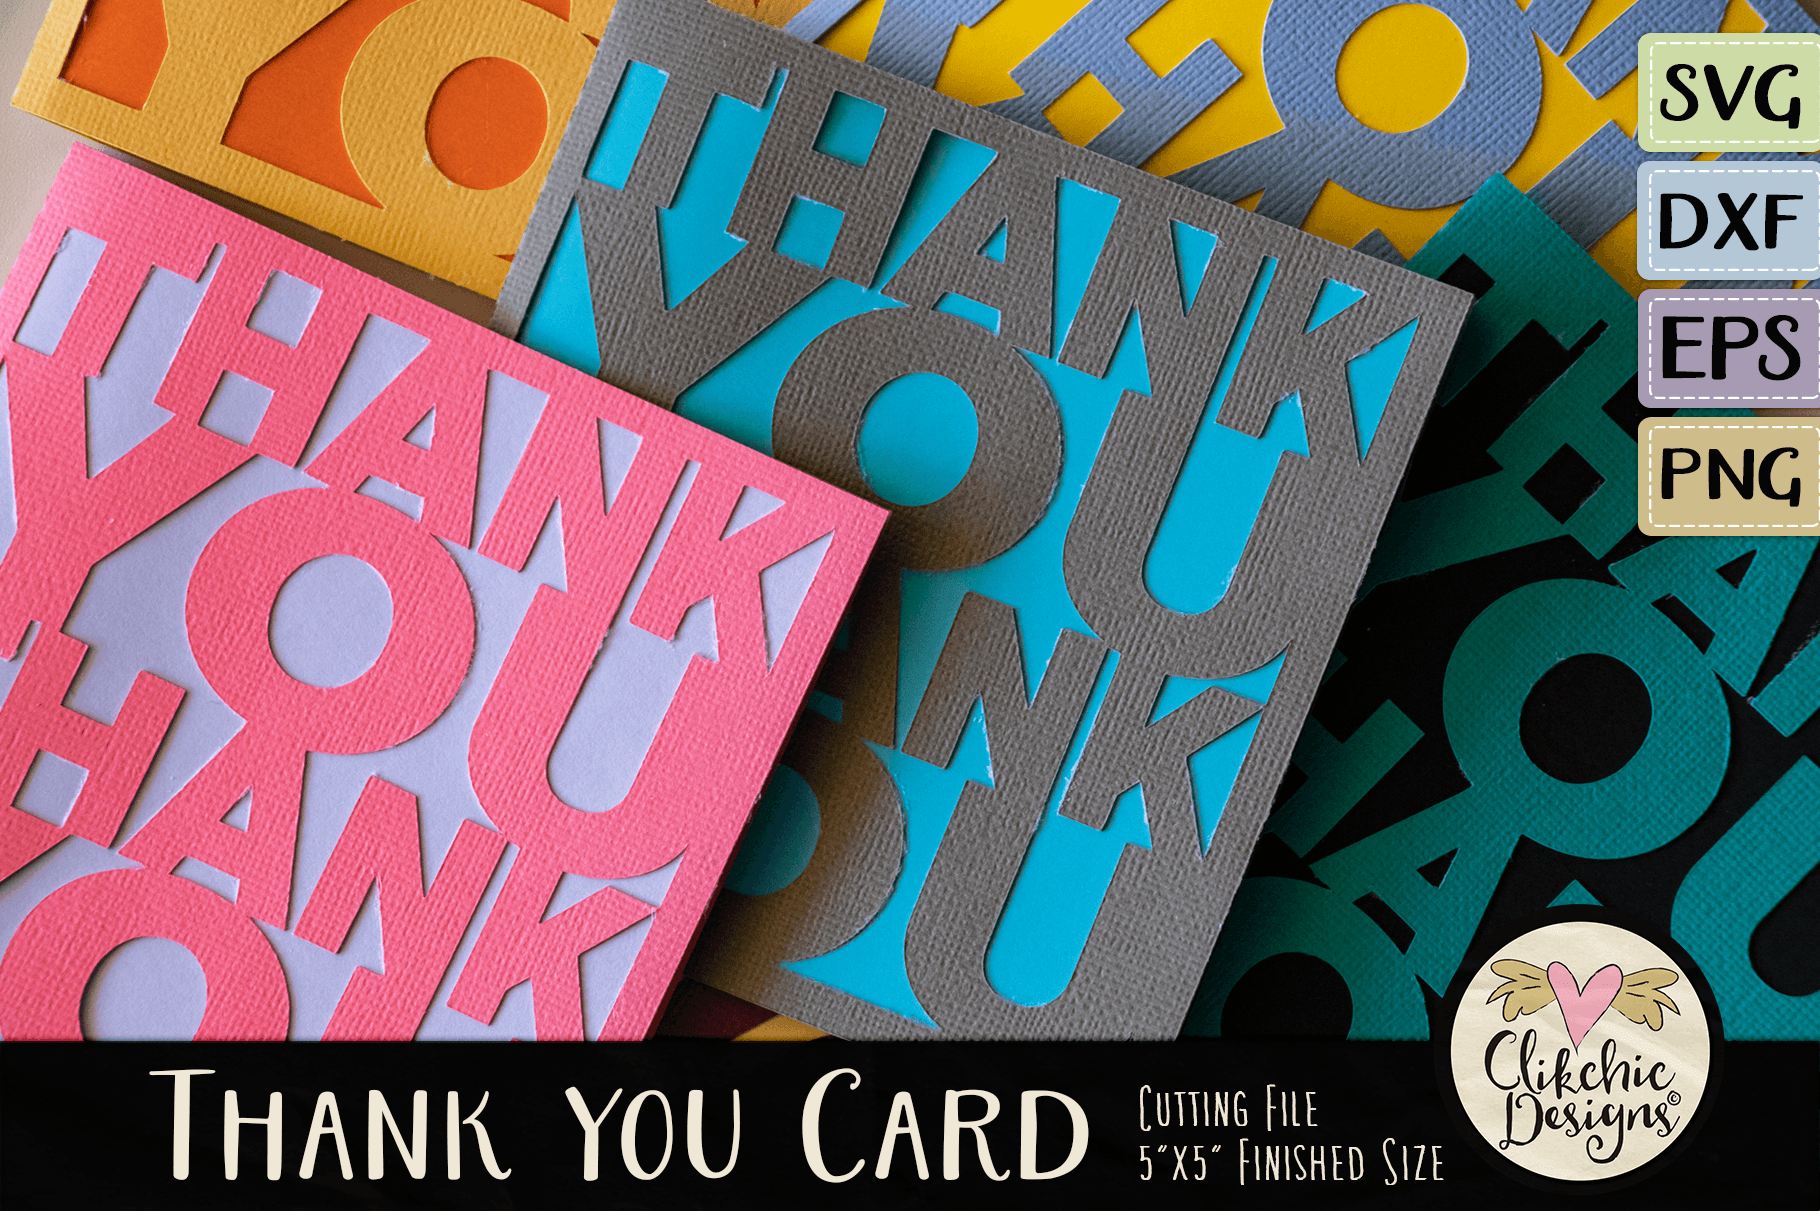 Download Thank You Card Svg Cutting File Tutorial By Clikchic Designs Thehungryjpeg Com